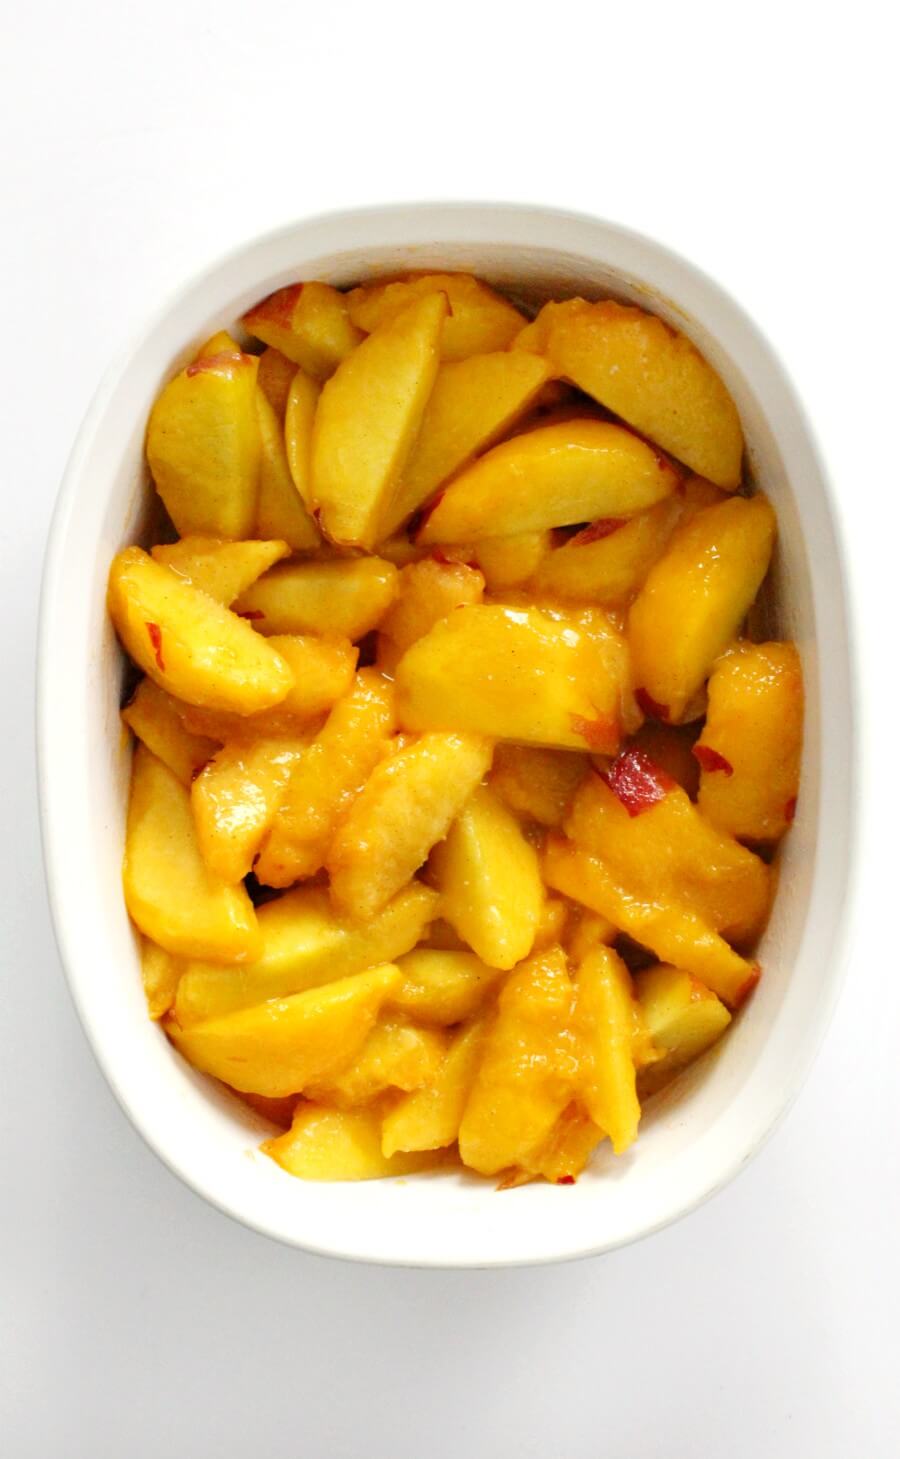 peaches in casserole dish to be baked for gluten-free peach cobbler